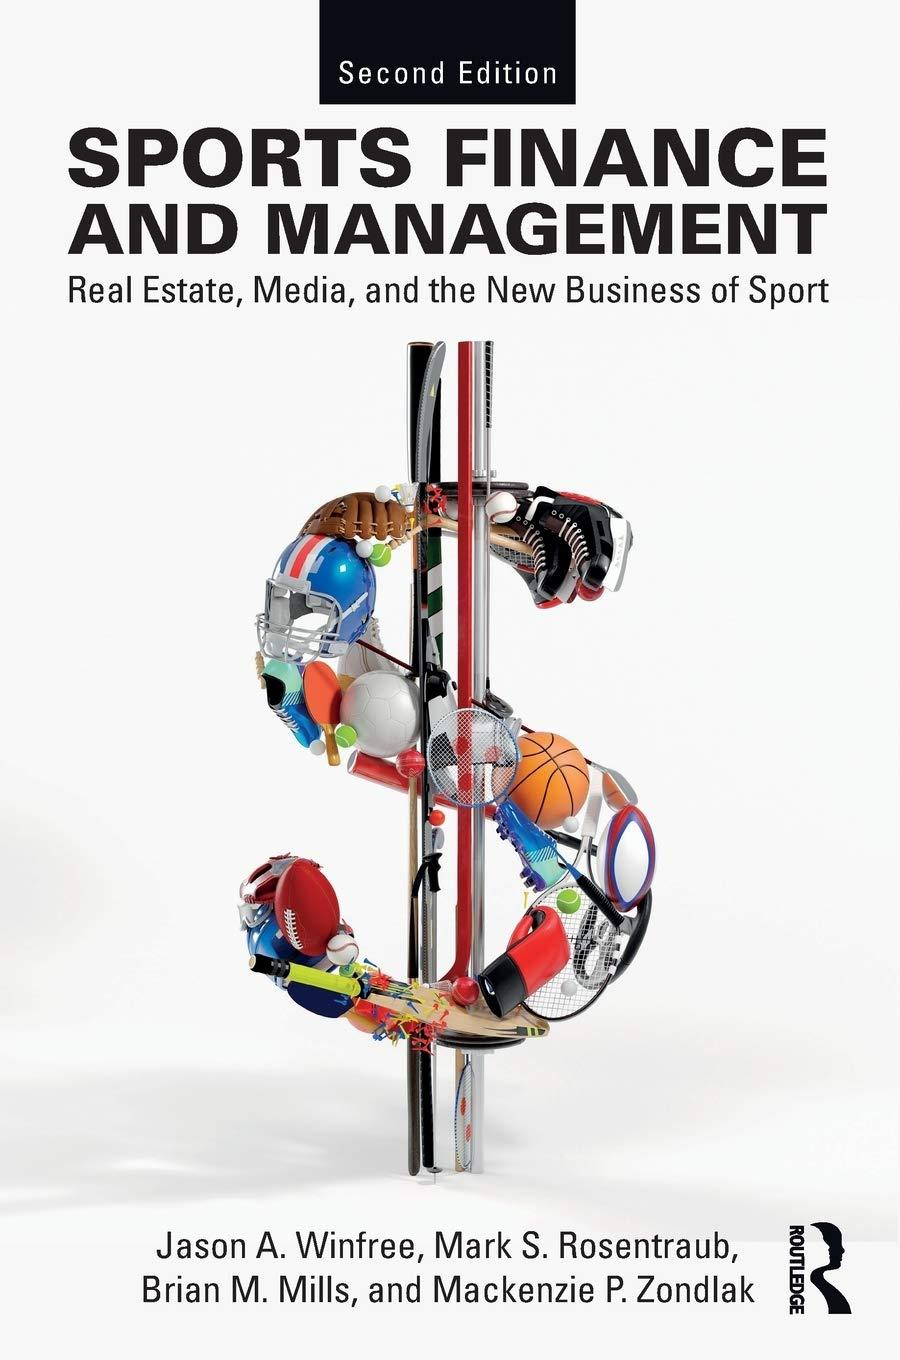 sports finance and management real estate media and the new business of sport 2nd edition jason a. winfree,